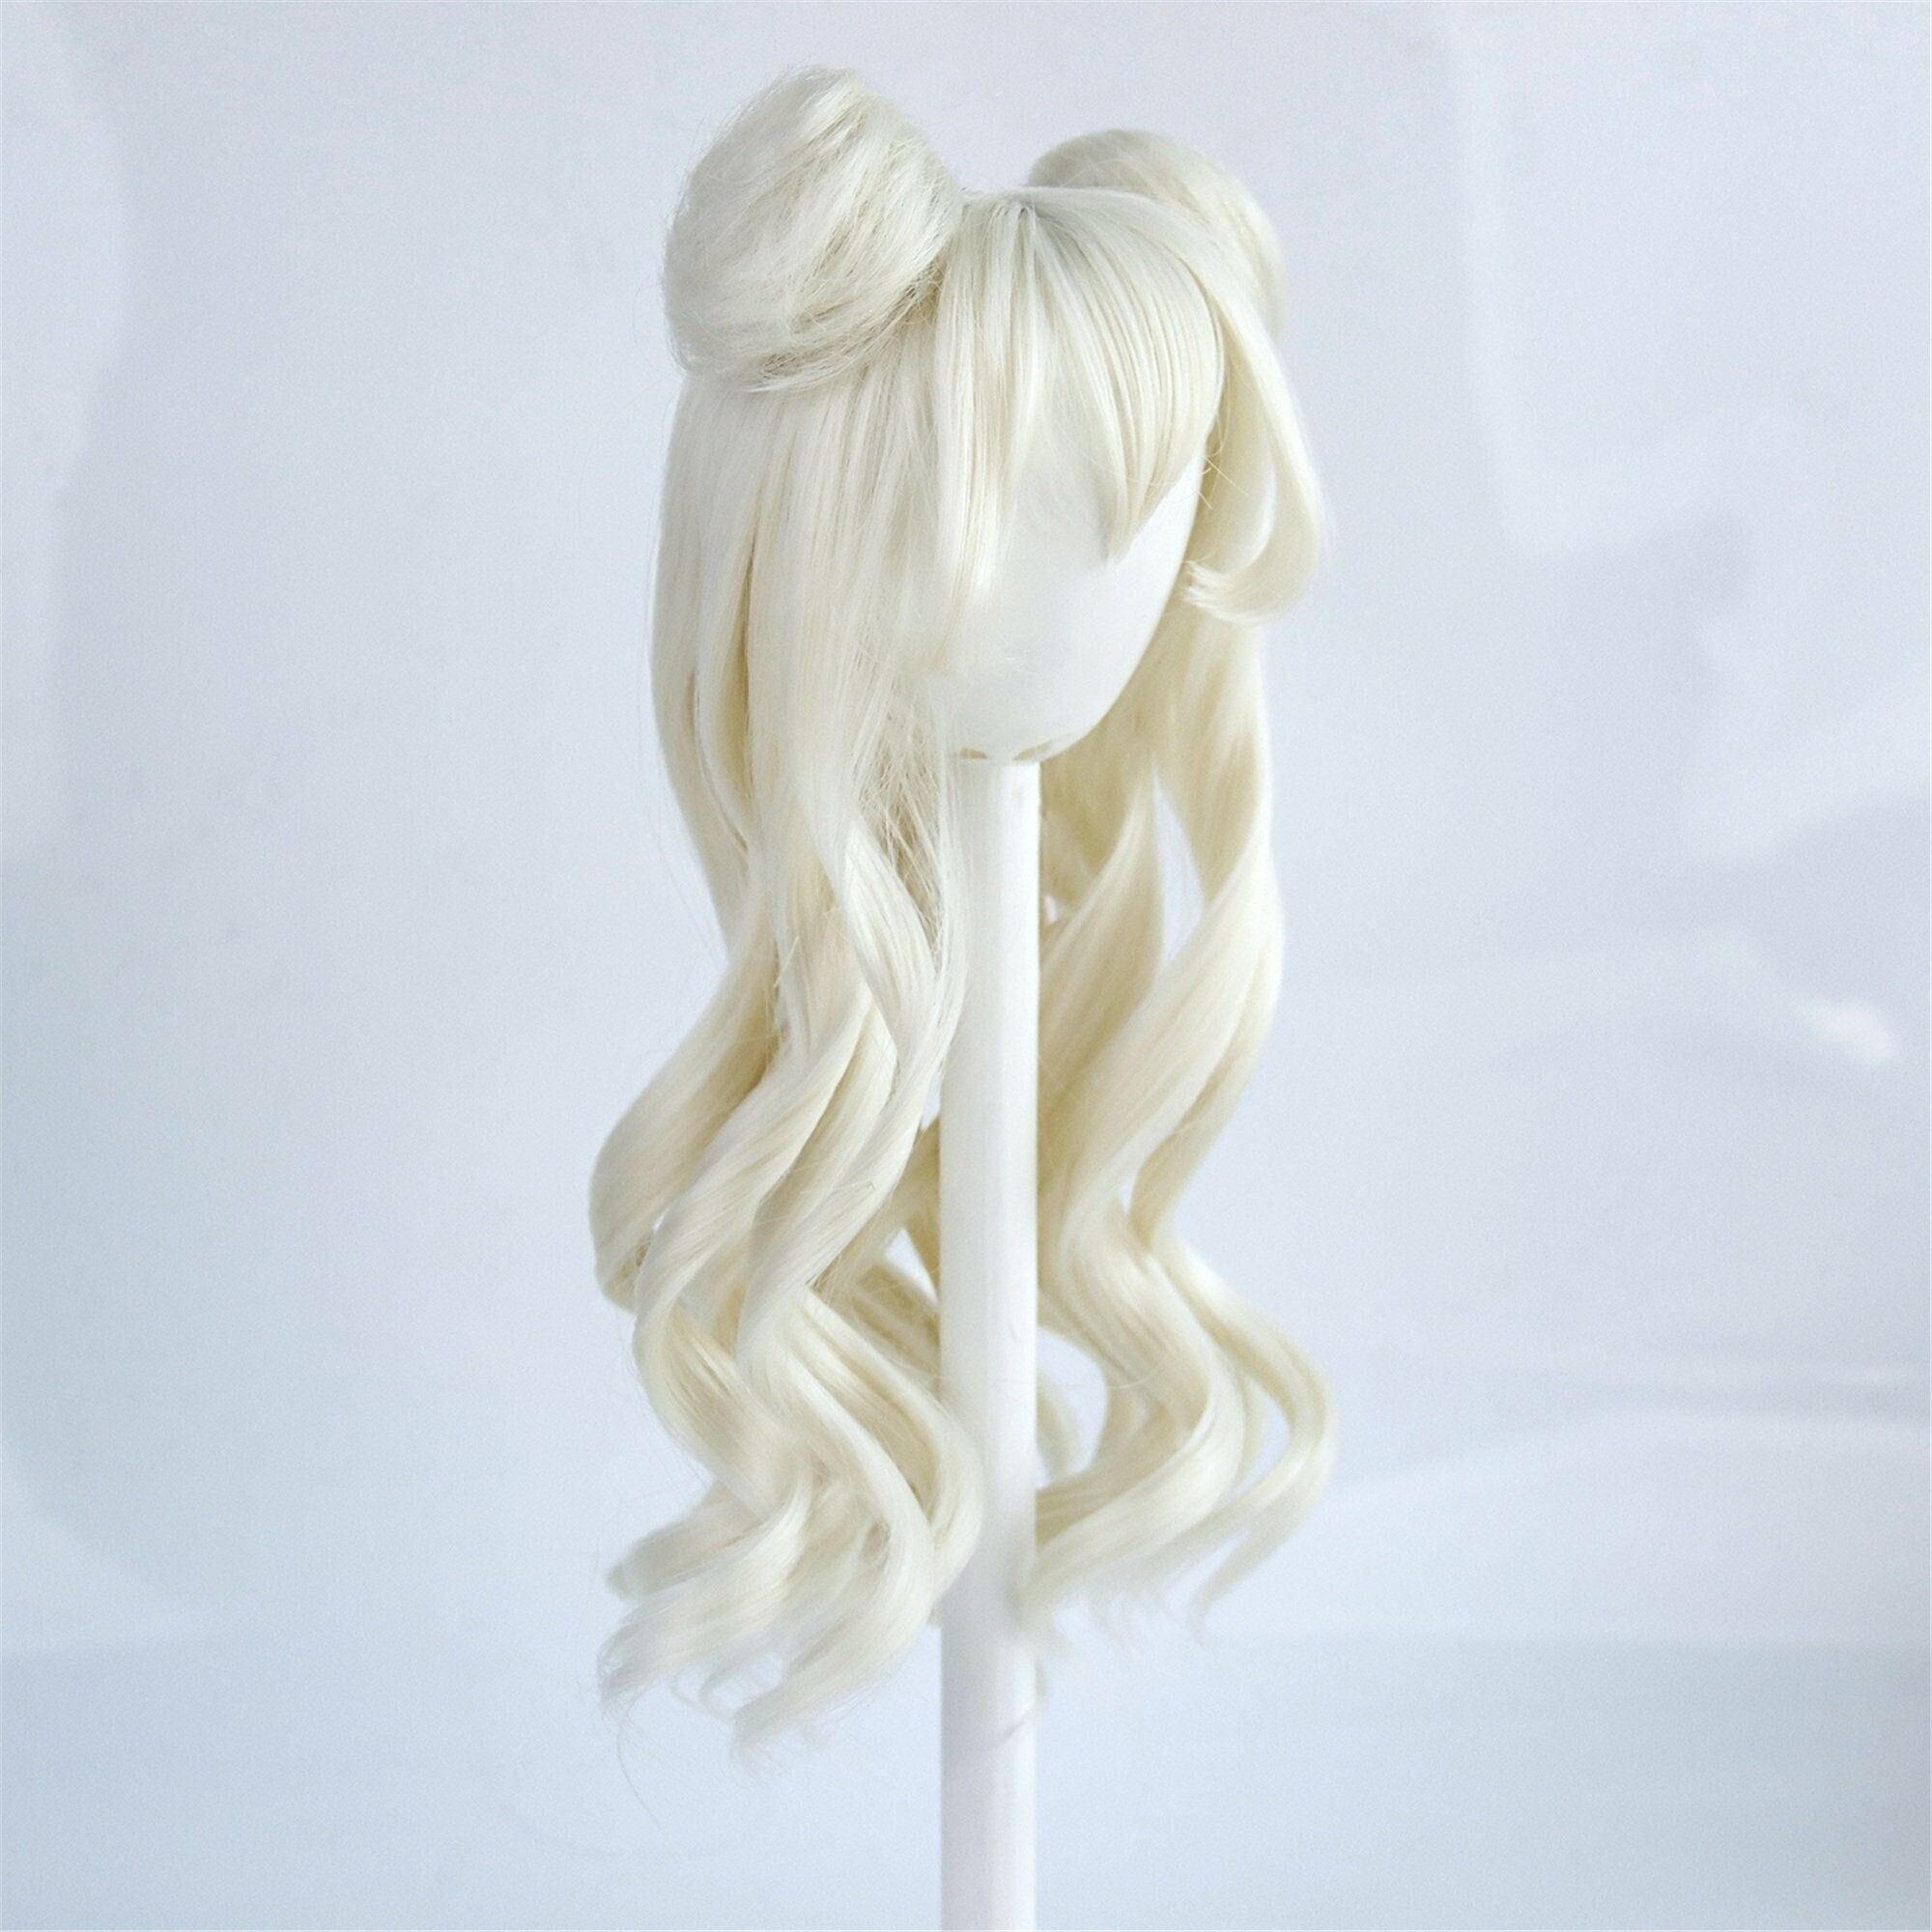 Wig Hanger Wig Dryer Wig Holder Wig Stand Hat Wig Storage Display Hat Rack  Dress up Drag Queen Lace Wig Natural Cosplay Alopecia Wigs 